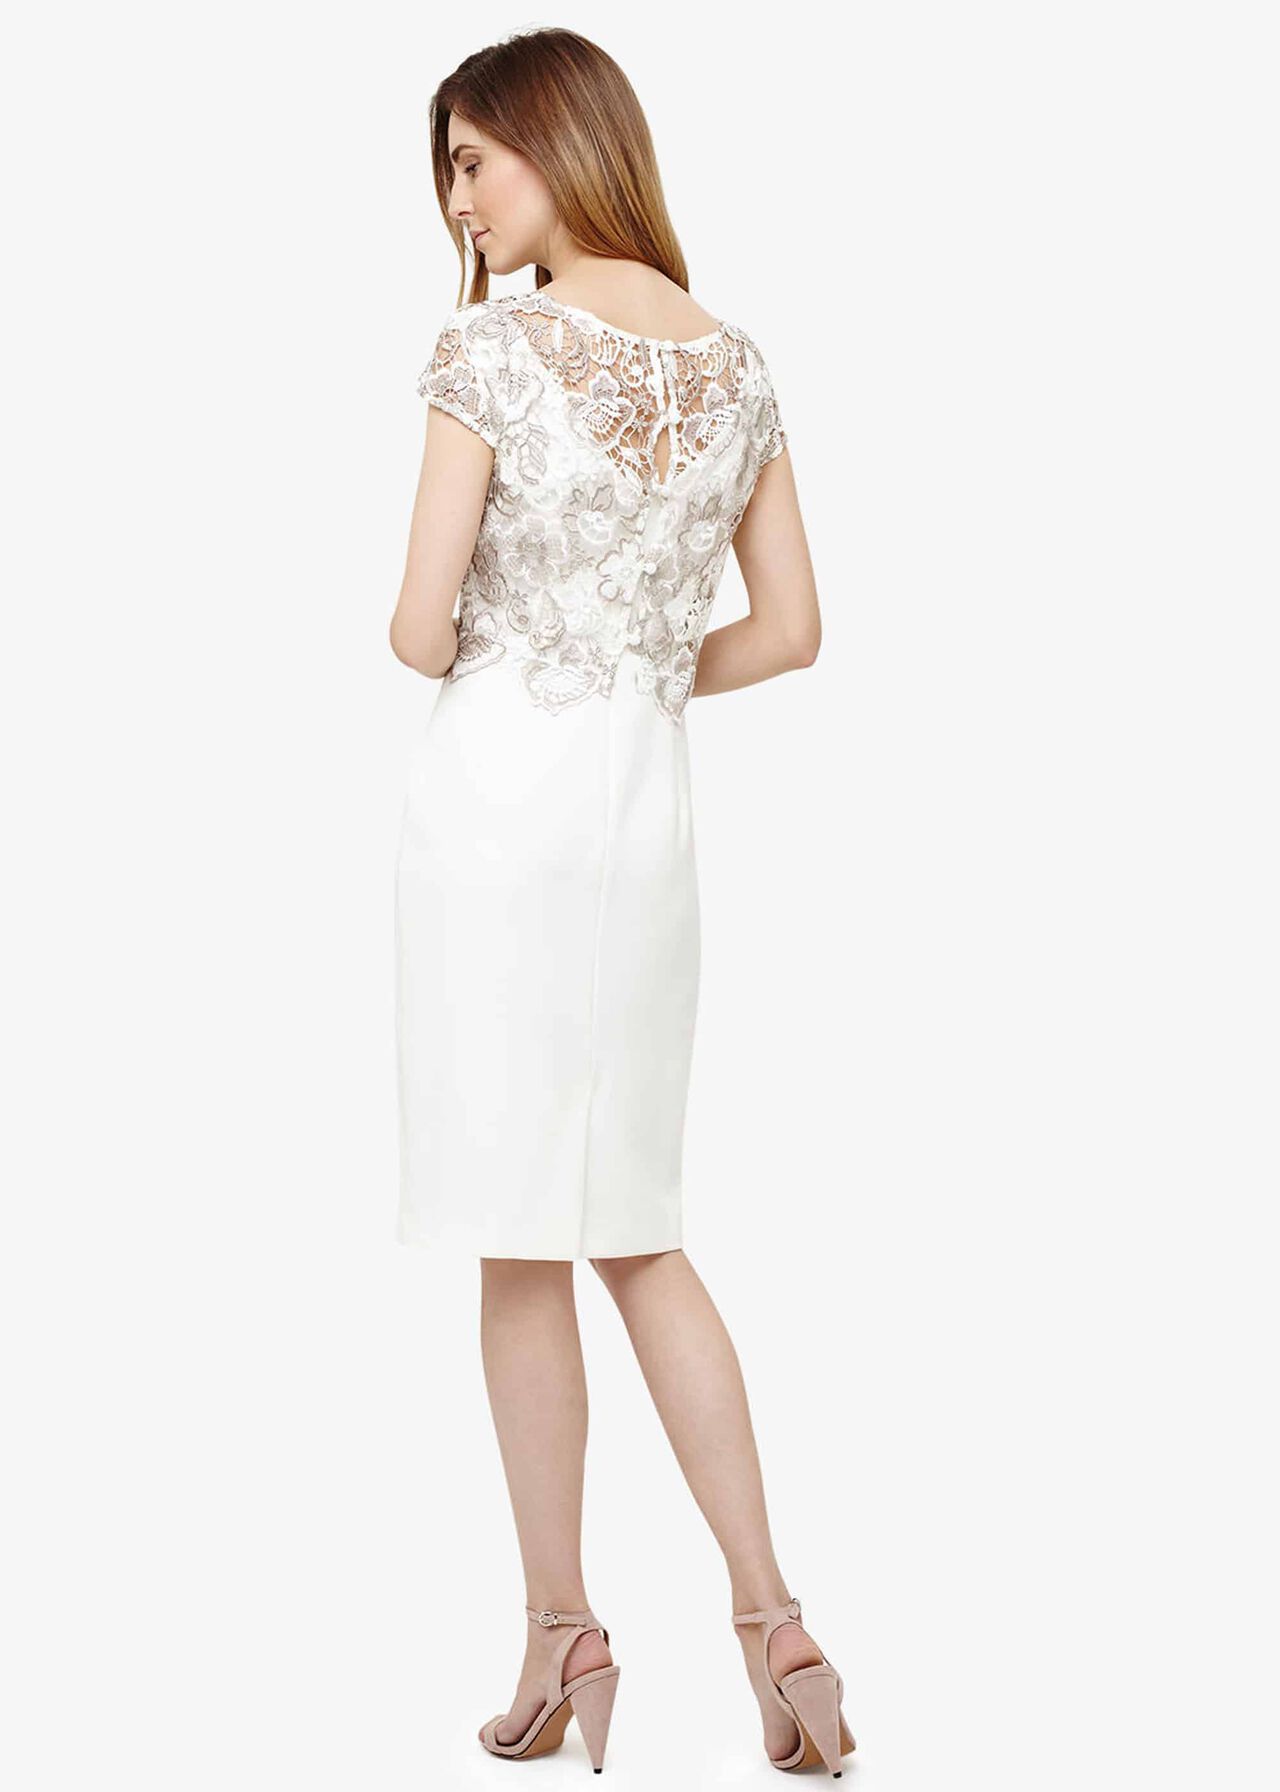 Juno Lace Dress | Phase Eight